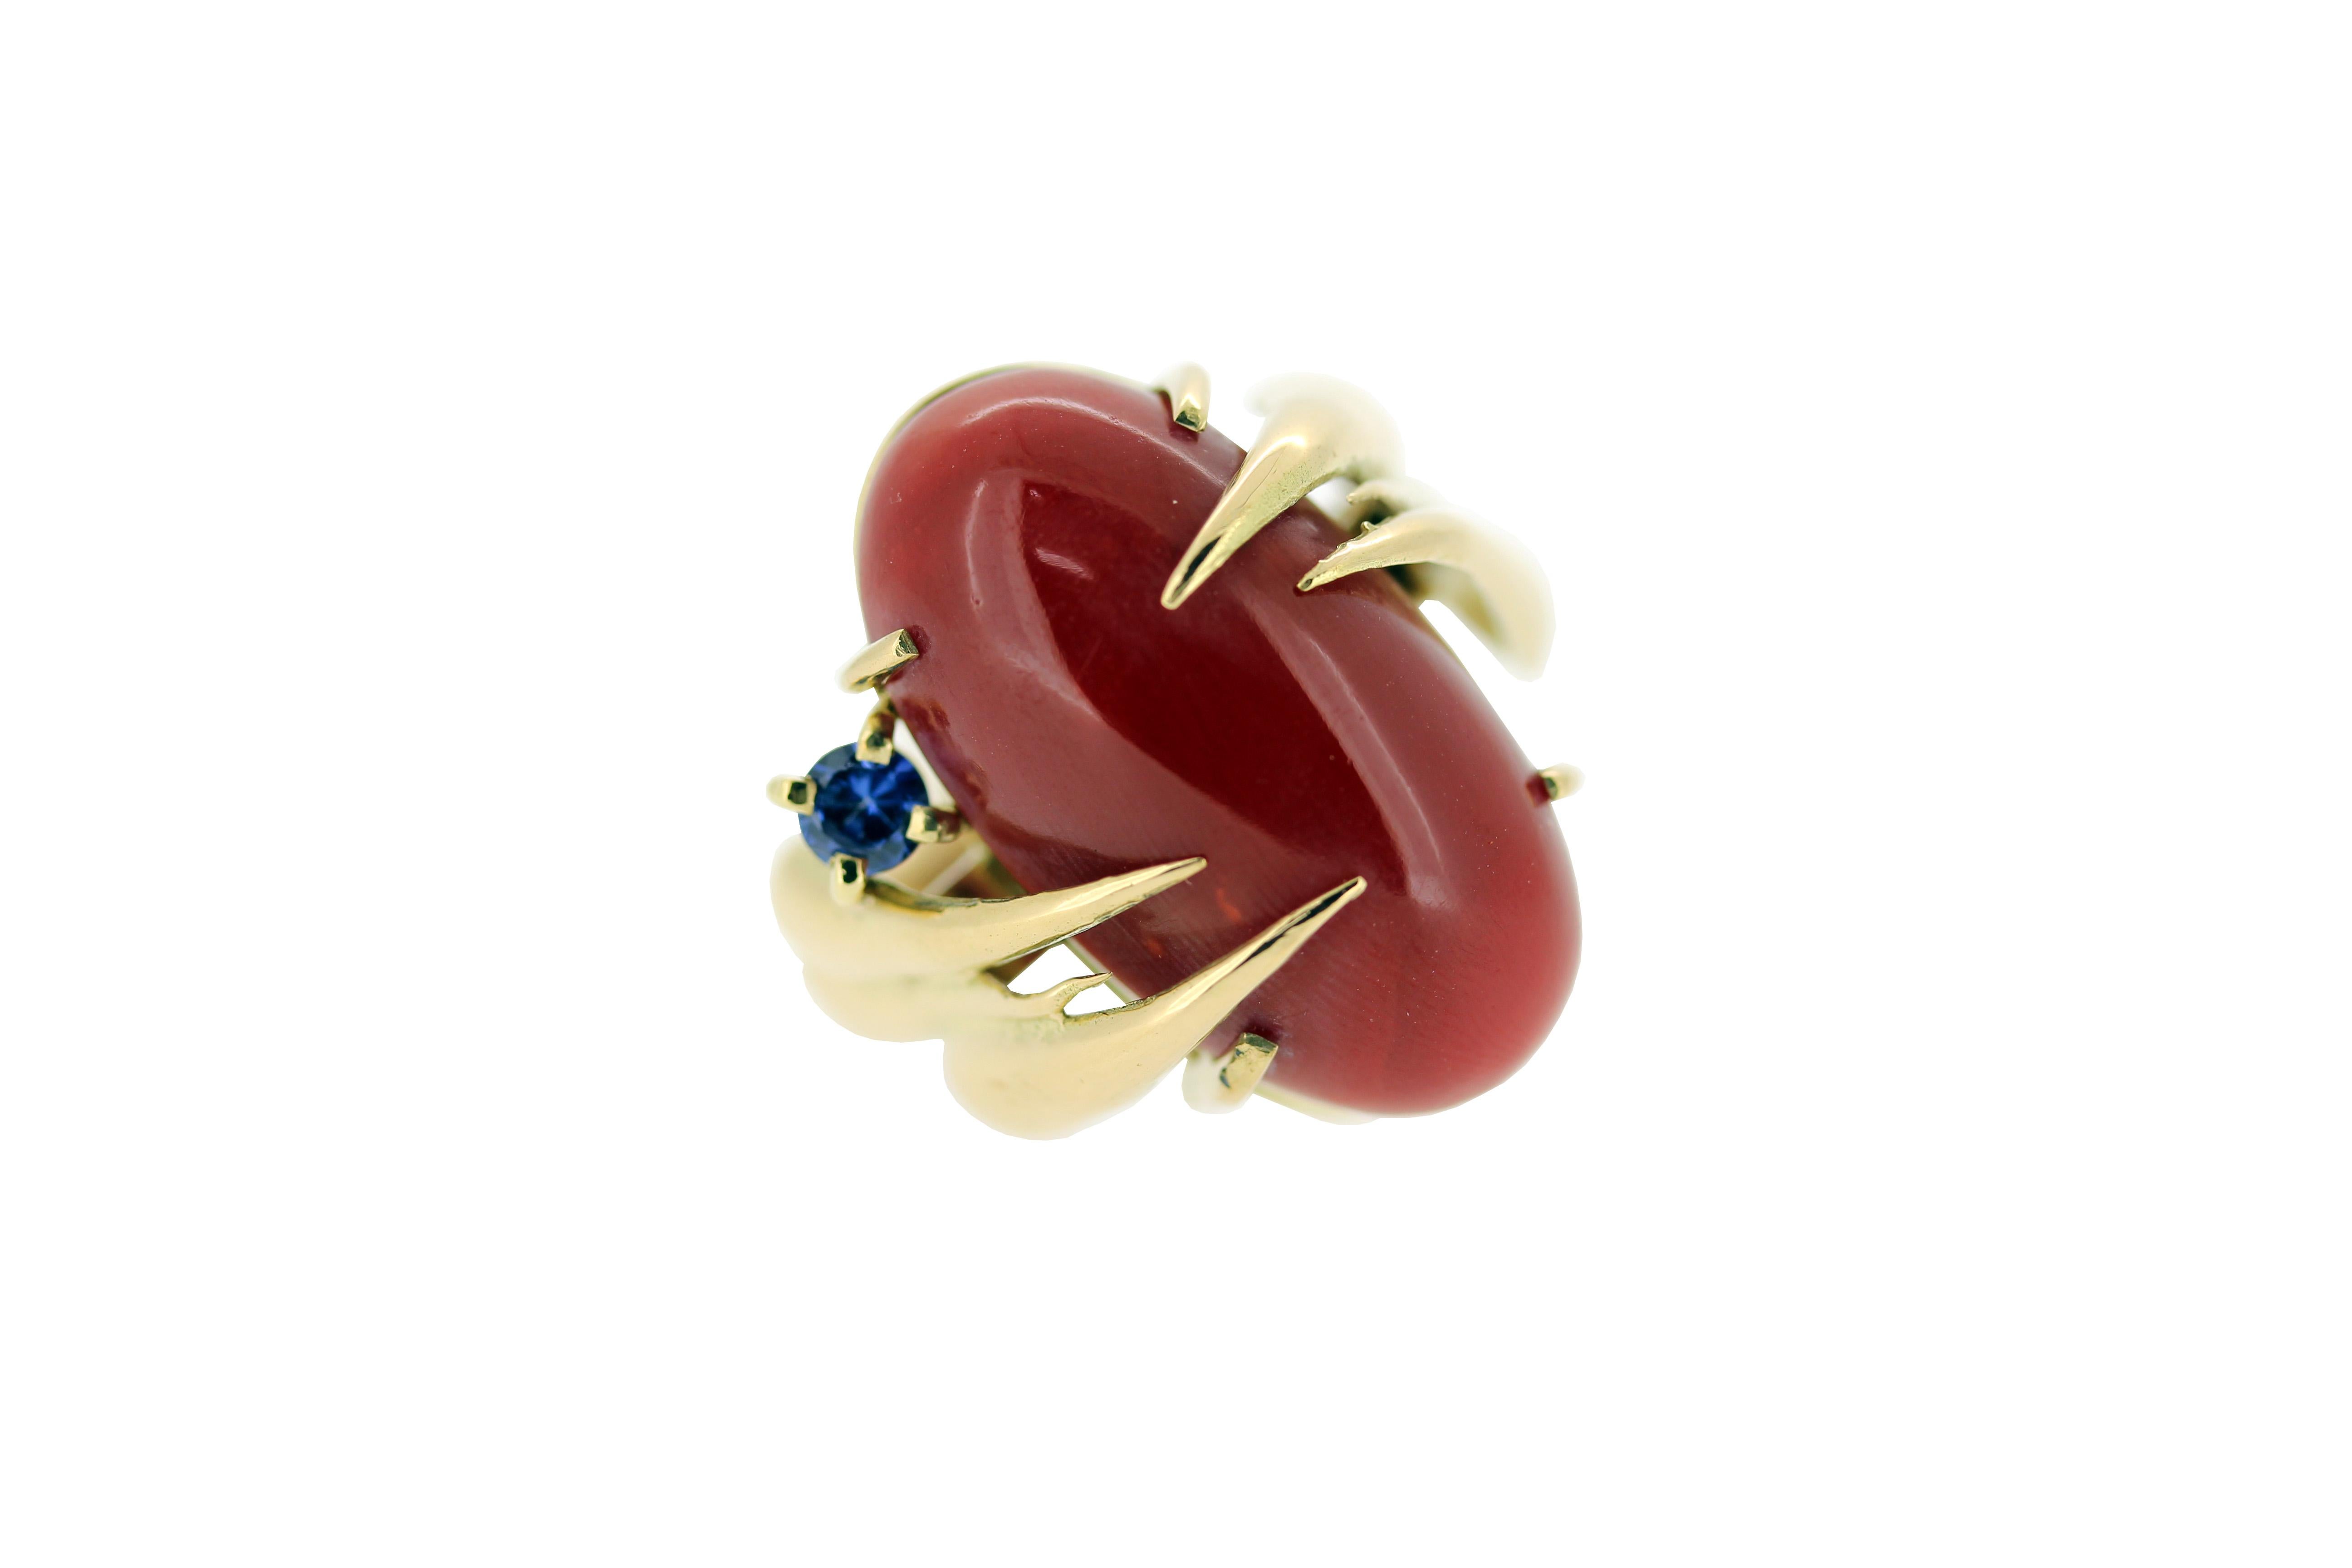 This modern handmade British-London Hallmarked 18 karat yellow gold ring, set with blue sapphire and oval shape cabochon vivid red coral is from MAIKO NAGAYAMA's Haute Couture Collection called 